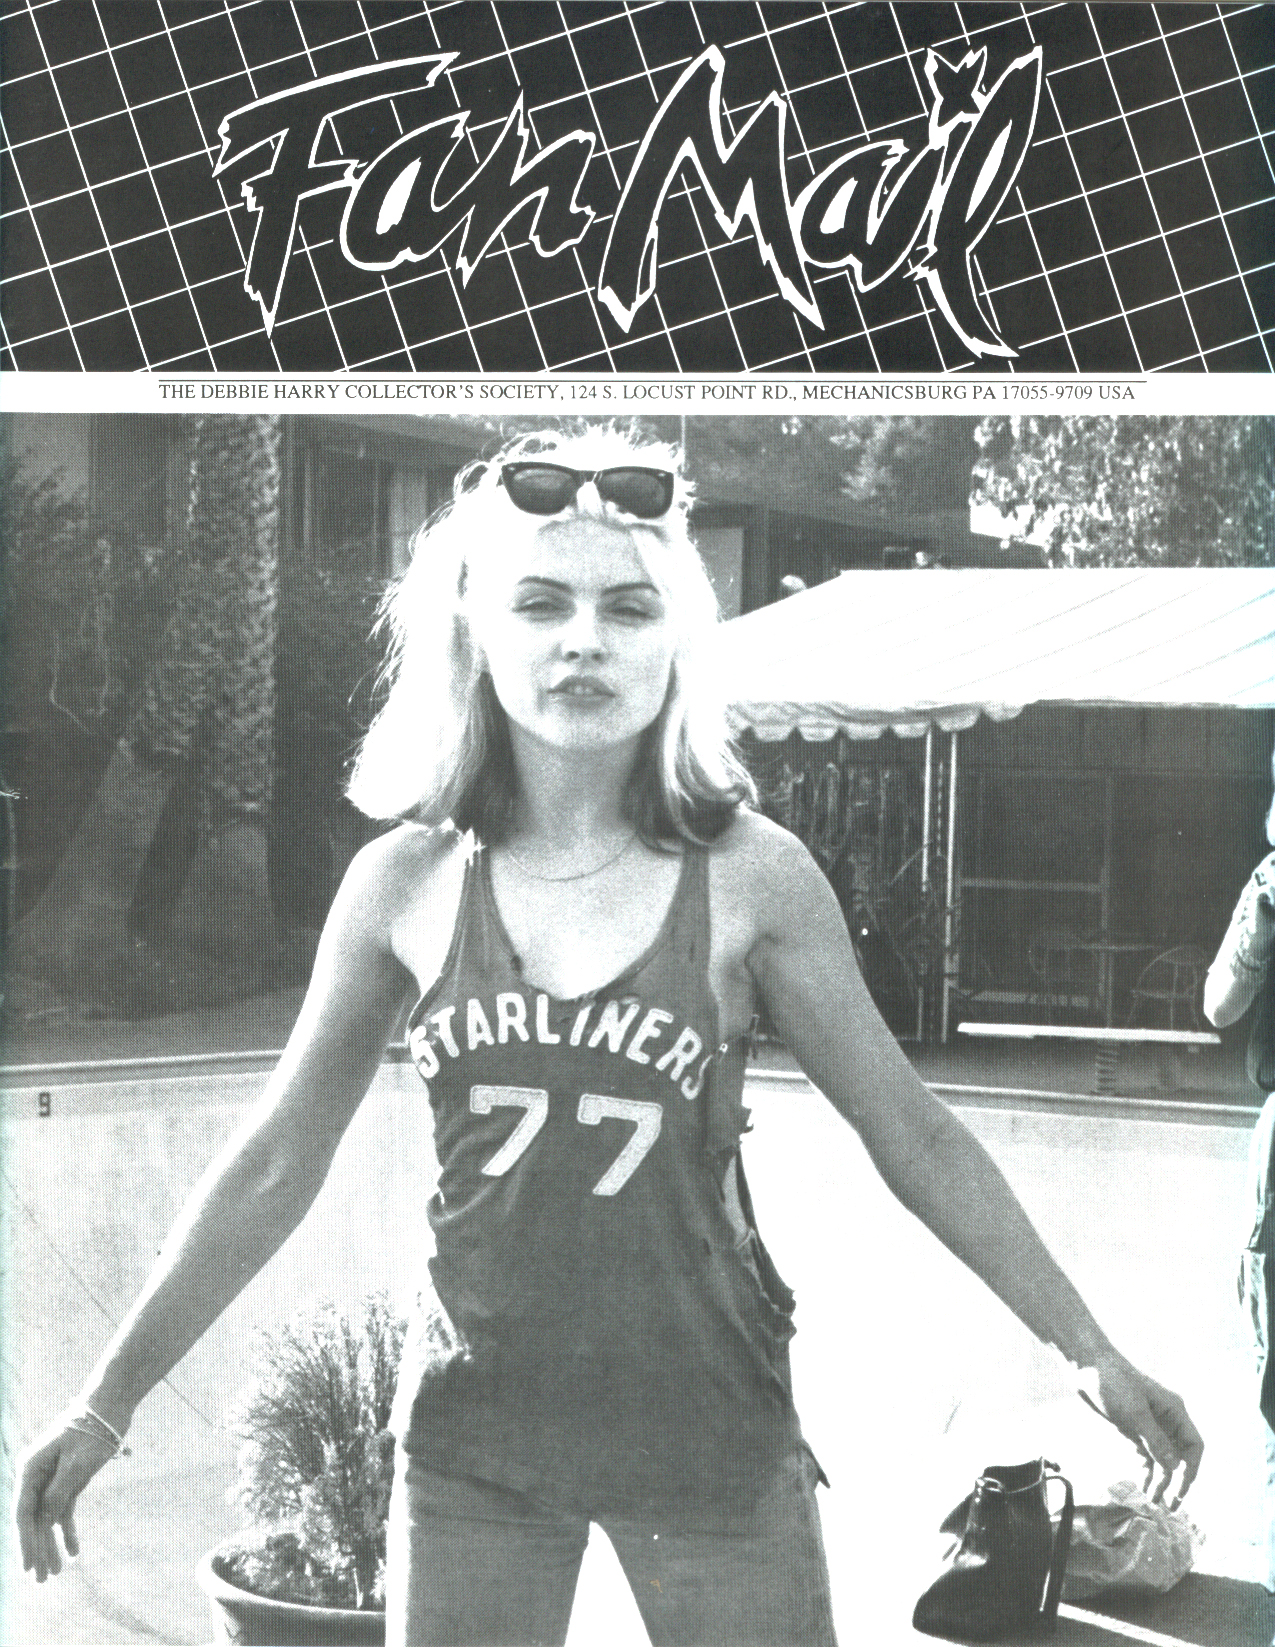 Fan Mail was the newsletter of the Debbie Harry Collector's Society. 